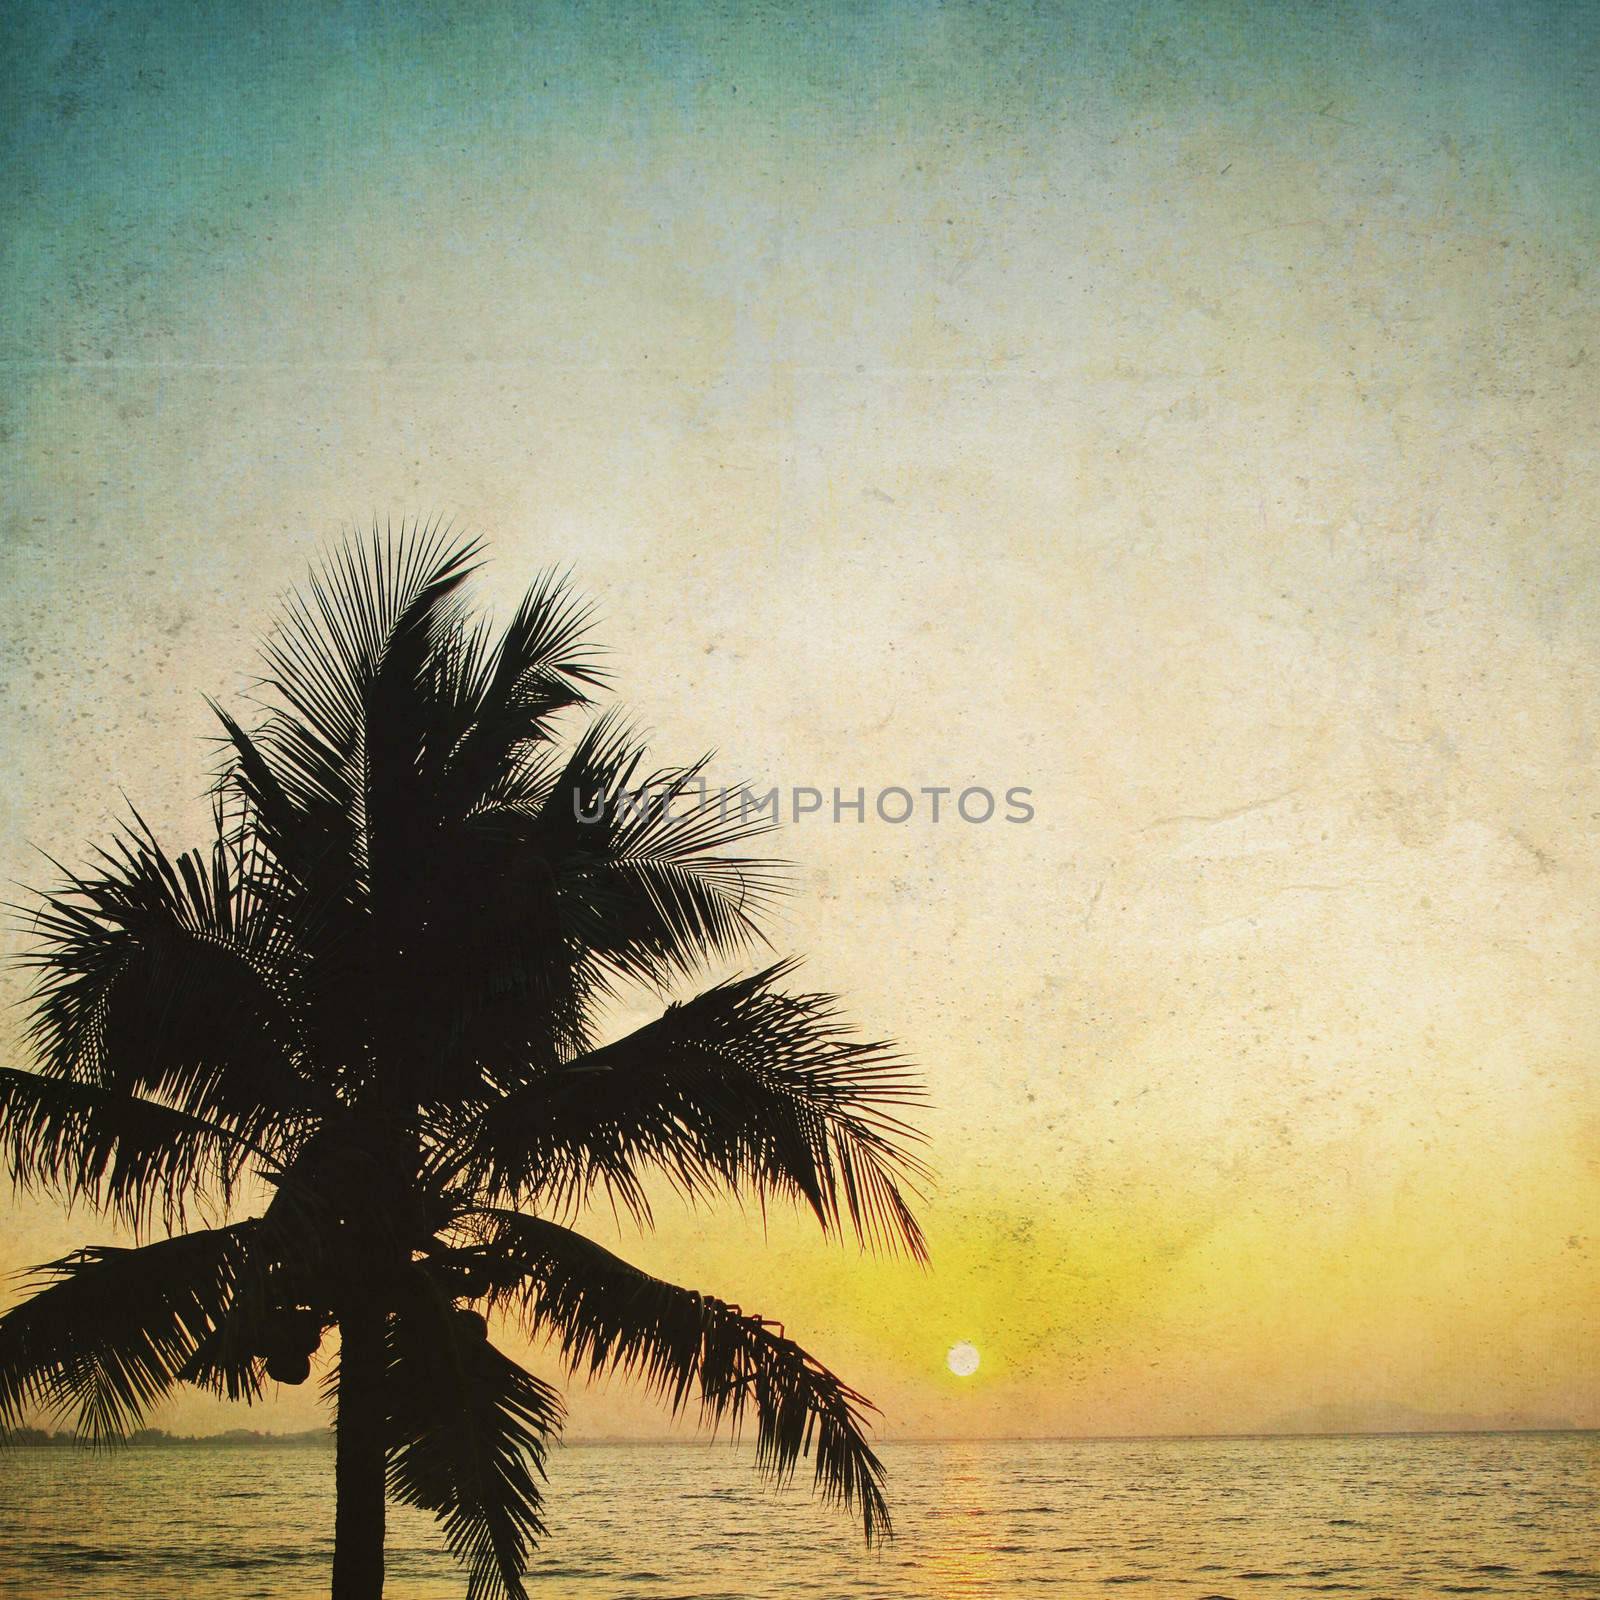 Coconut palm tree silhouetted and sunrise 
in vintage background